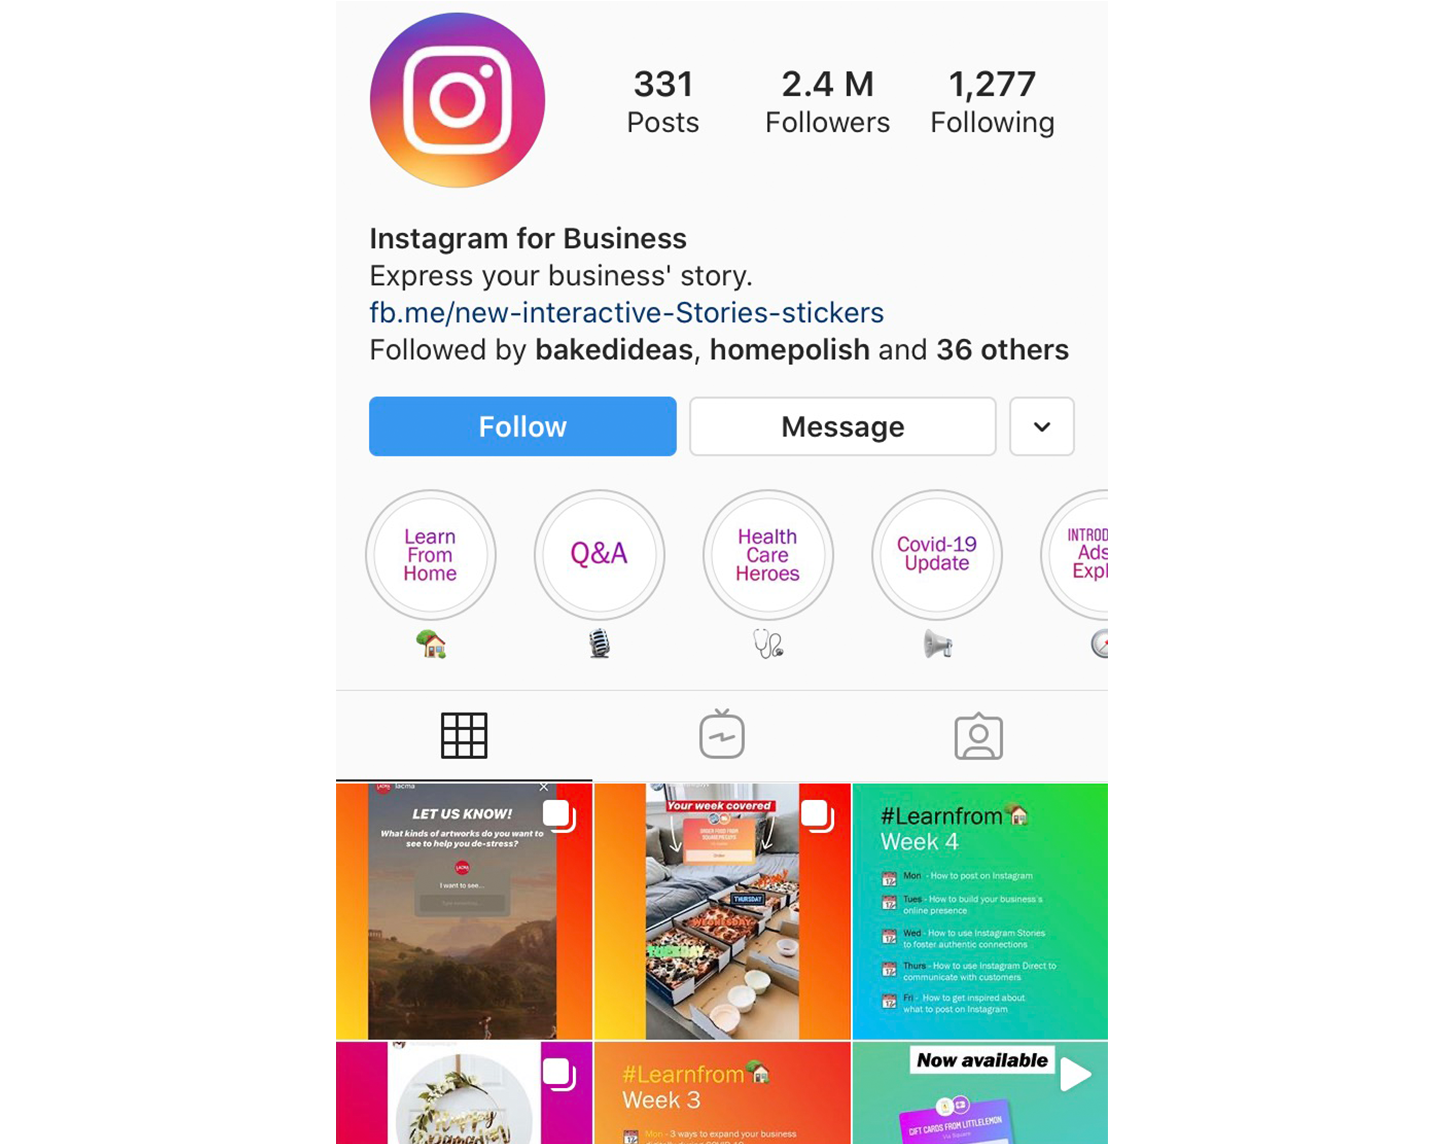 How To Build Your Small Business on Instagram